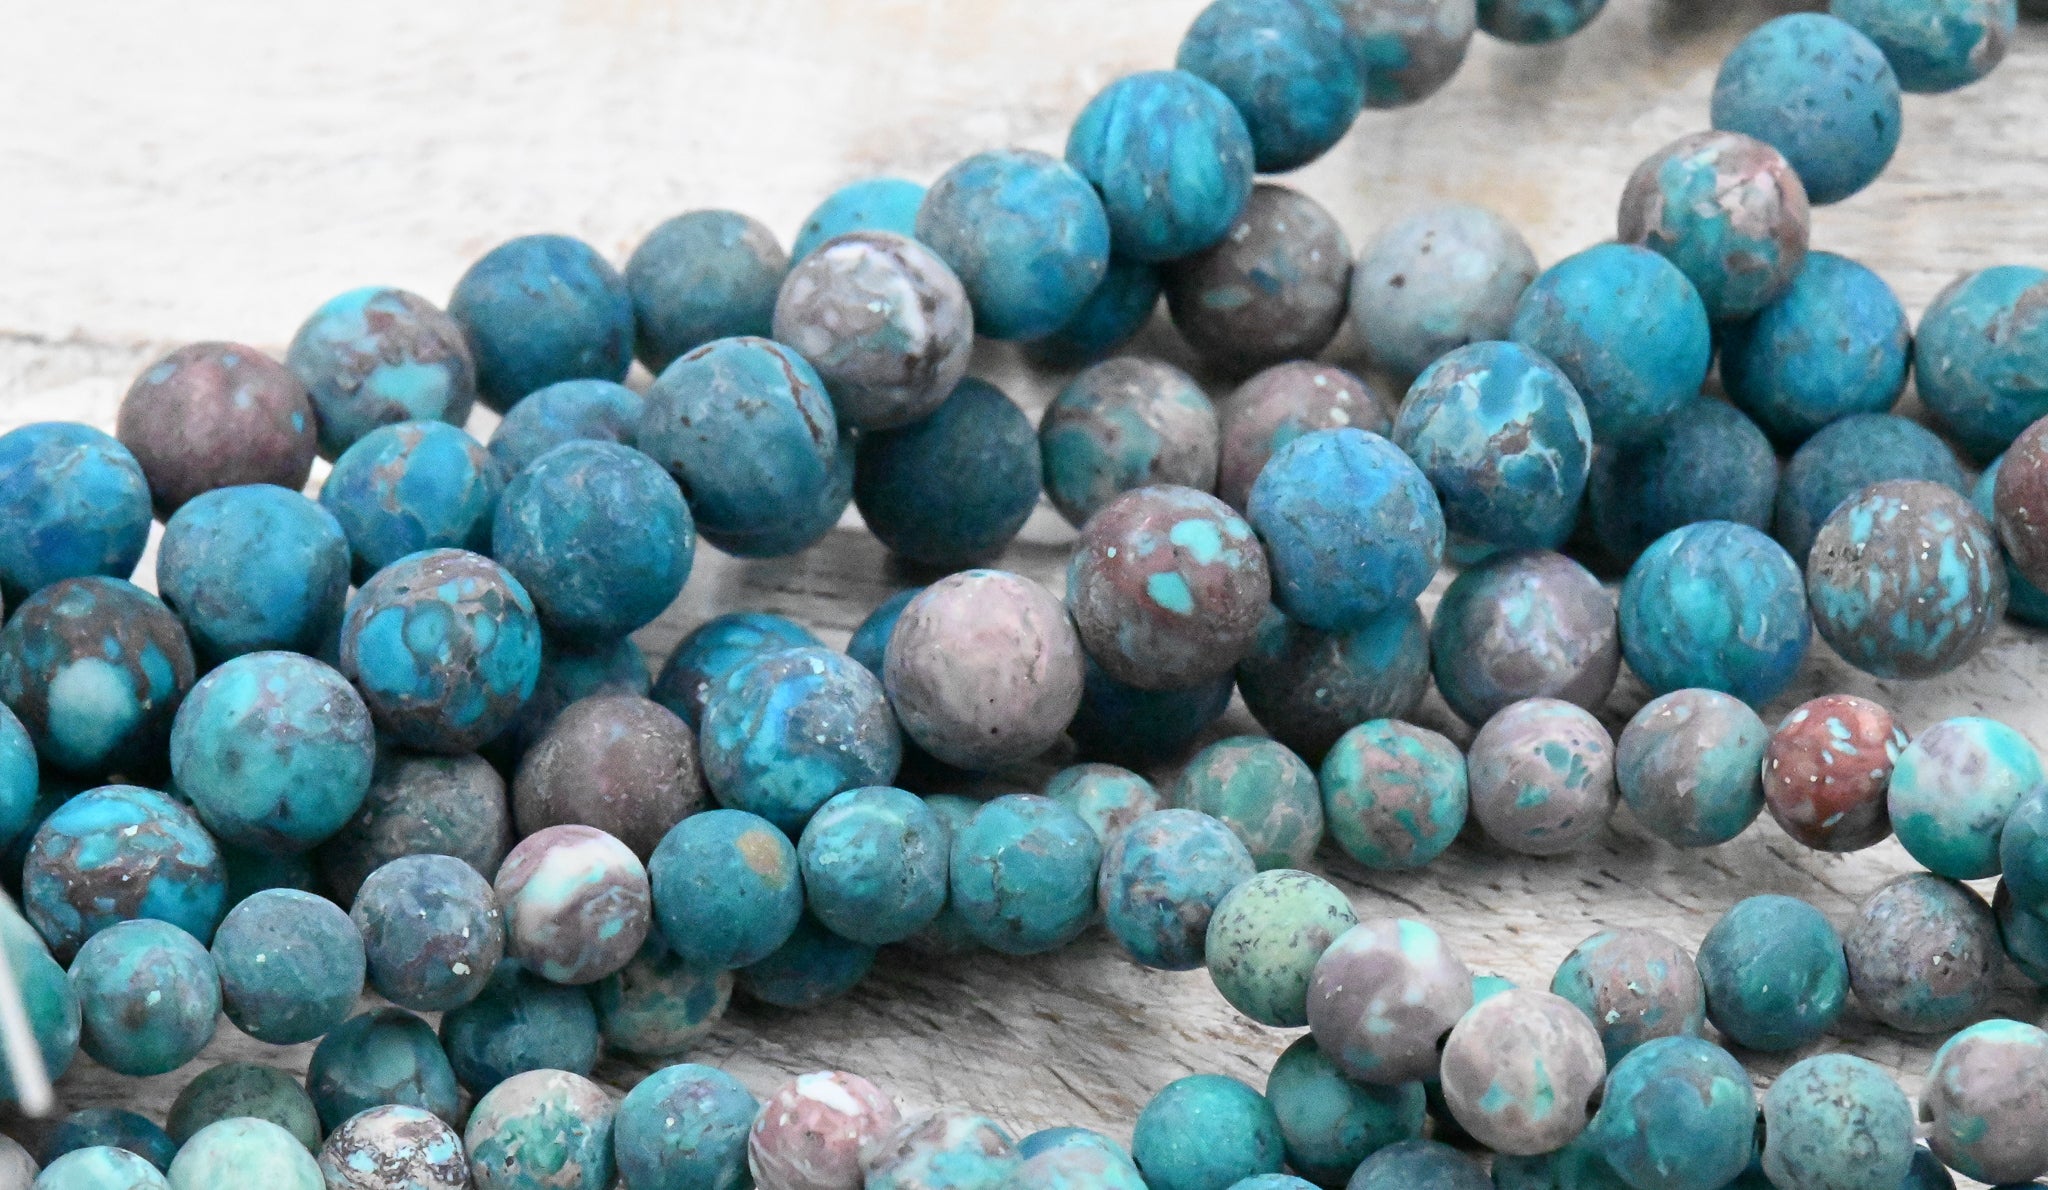 Natural Blue Turquoise 6mm, 8mm Frosted